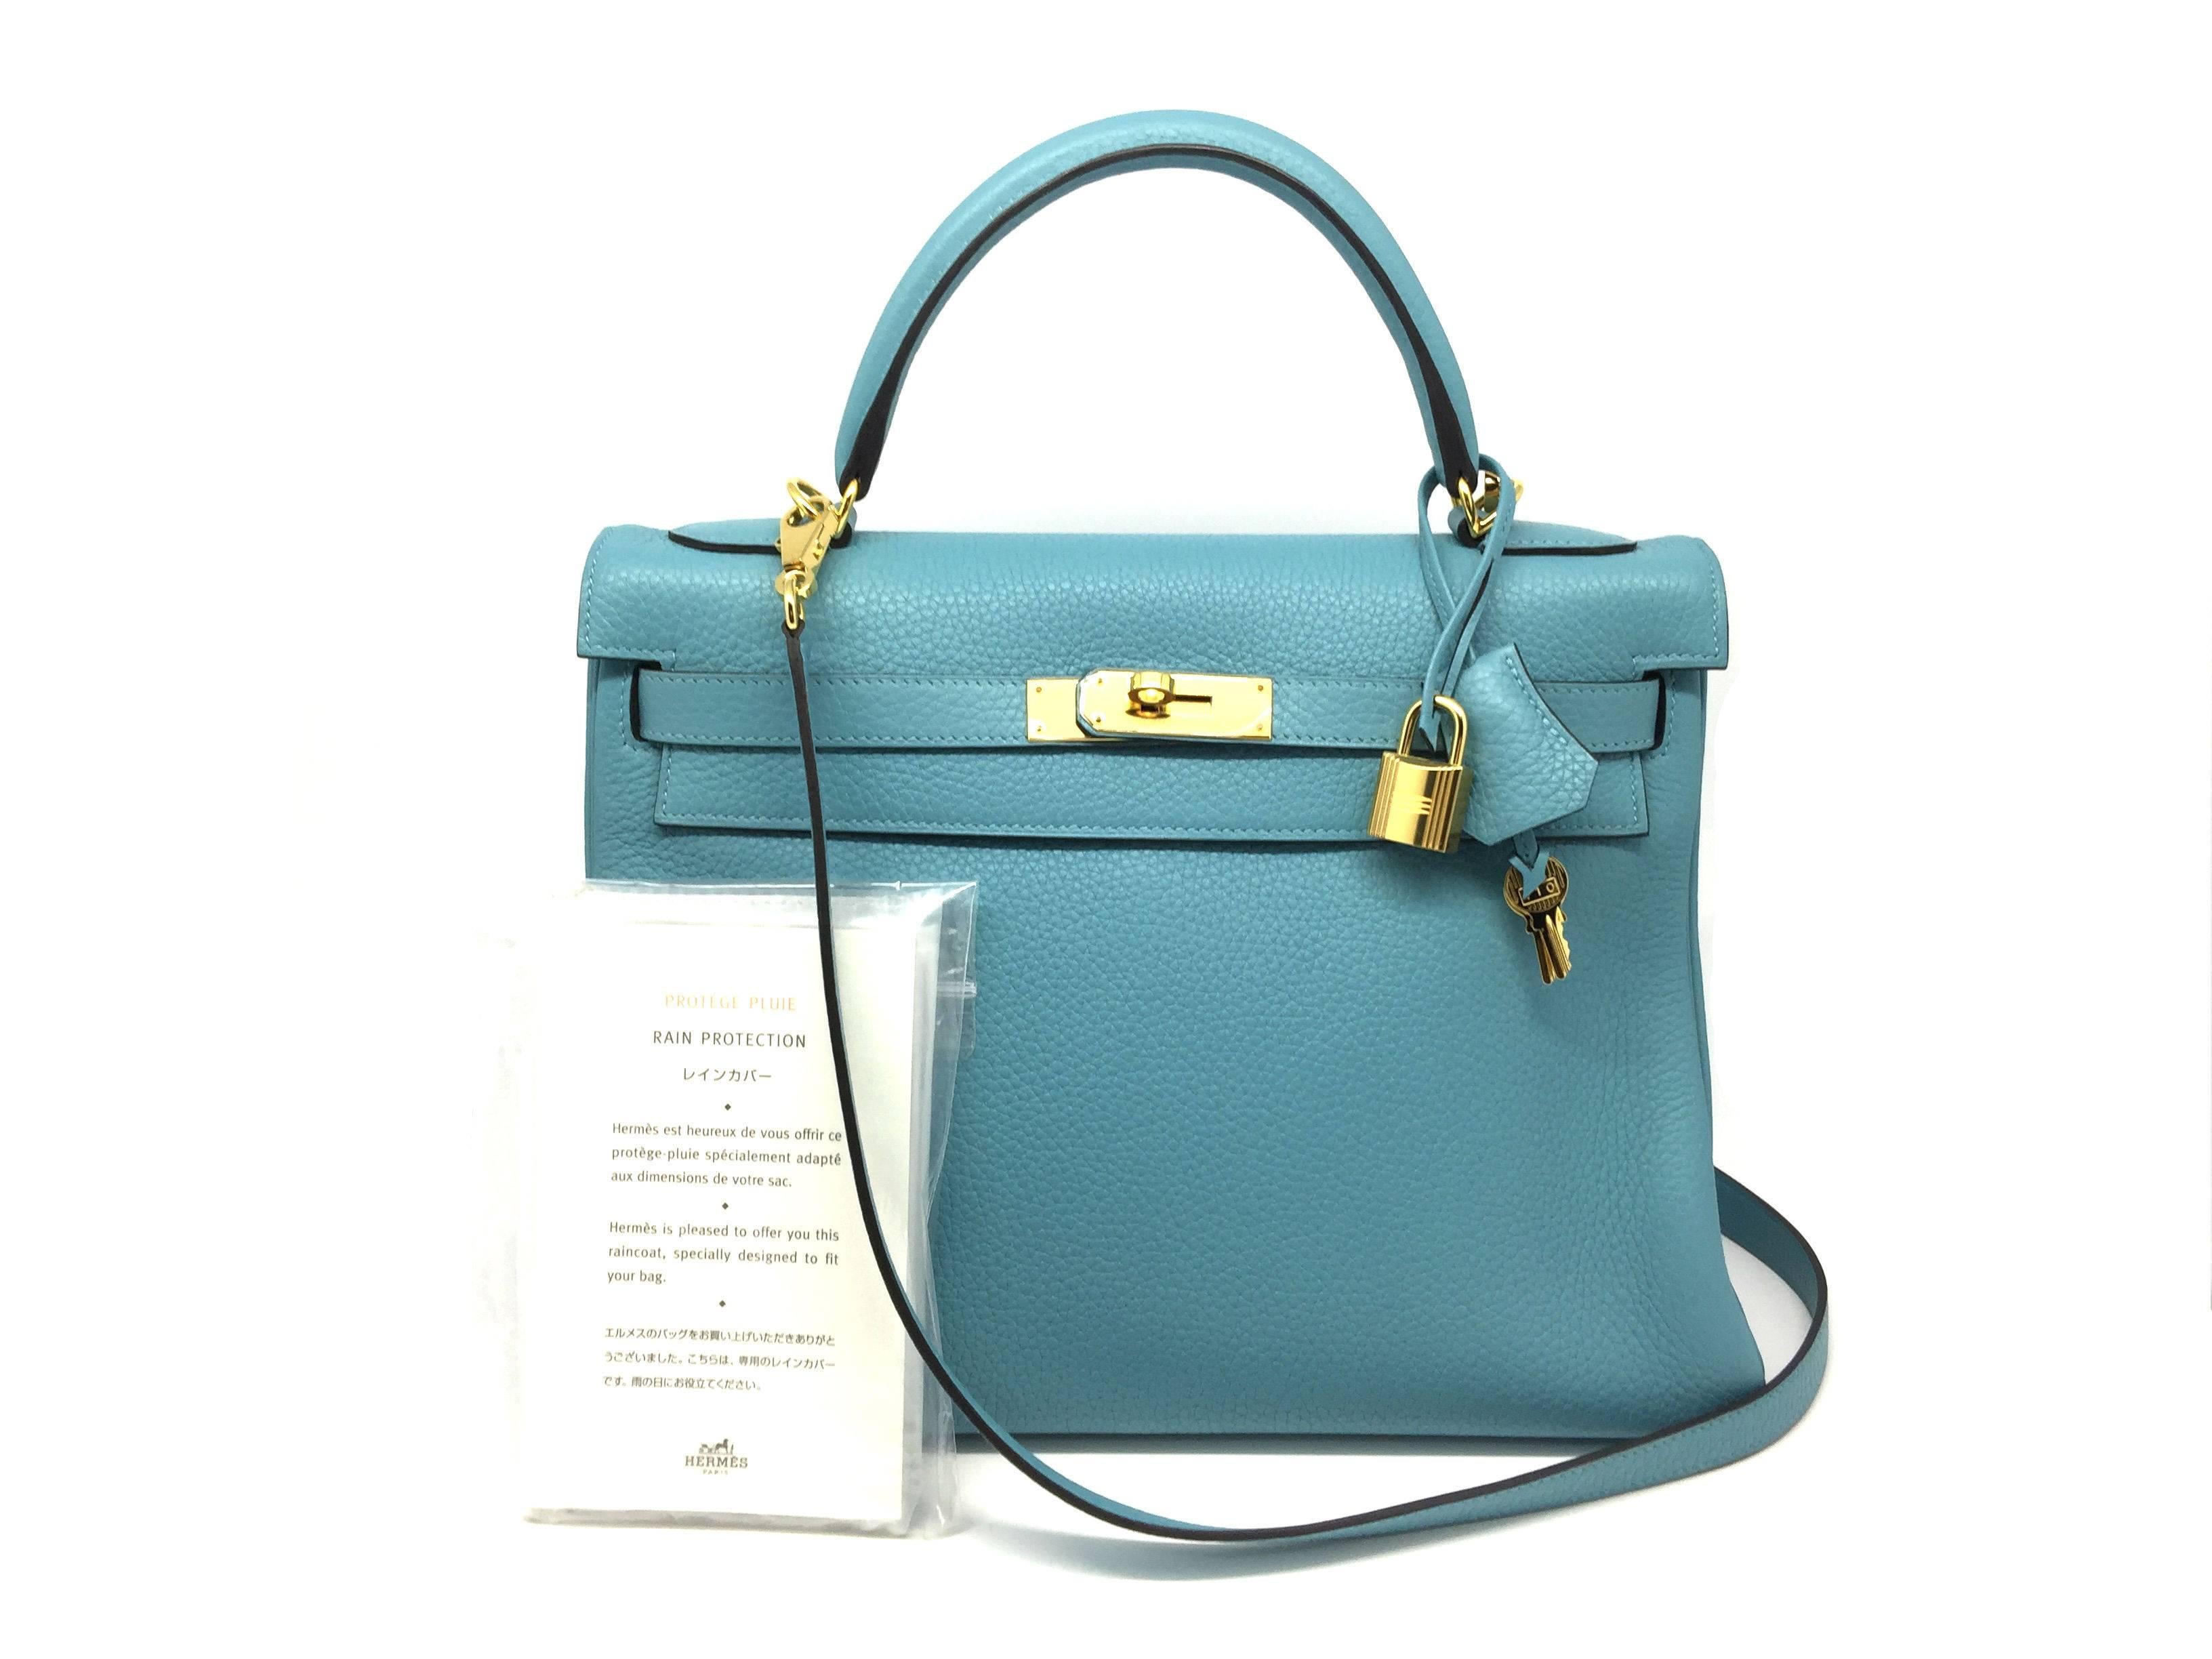 Color: Blue / Bleu Saint Cyr (designer color)
Material: Taurillon Clemence Leather

Condition:
Rank N
Overall: Brand New Not Used
Surface: Good
Corners: Good
Edges: Good
Handles/Straps: Good
Hardware: Good

Dimension:
W32 x H23 x D13 cm(W12.6"